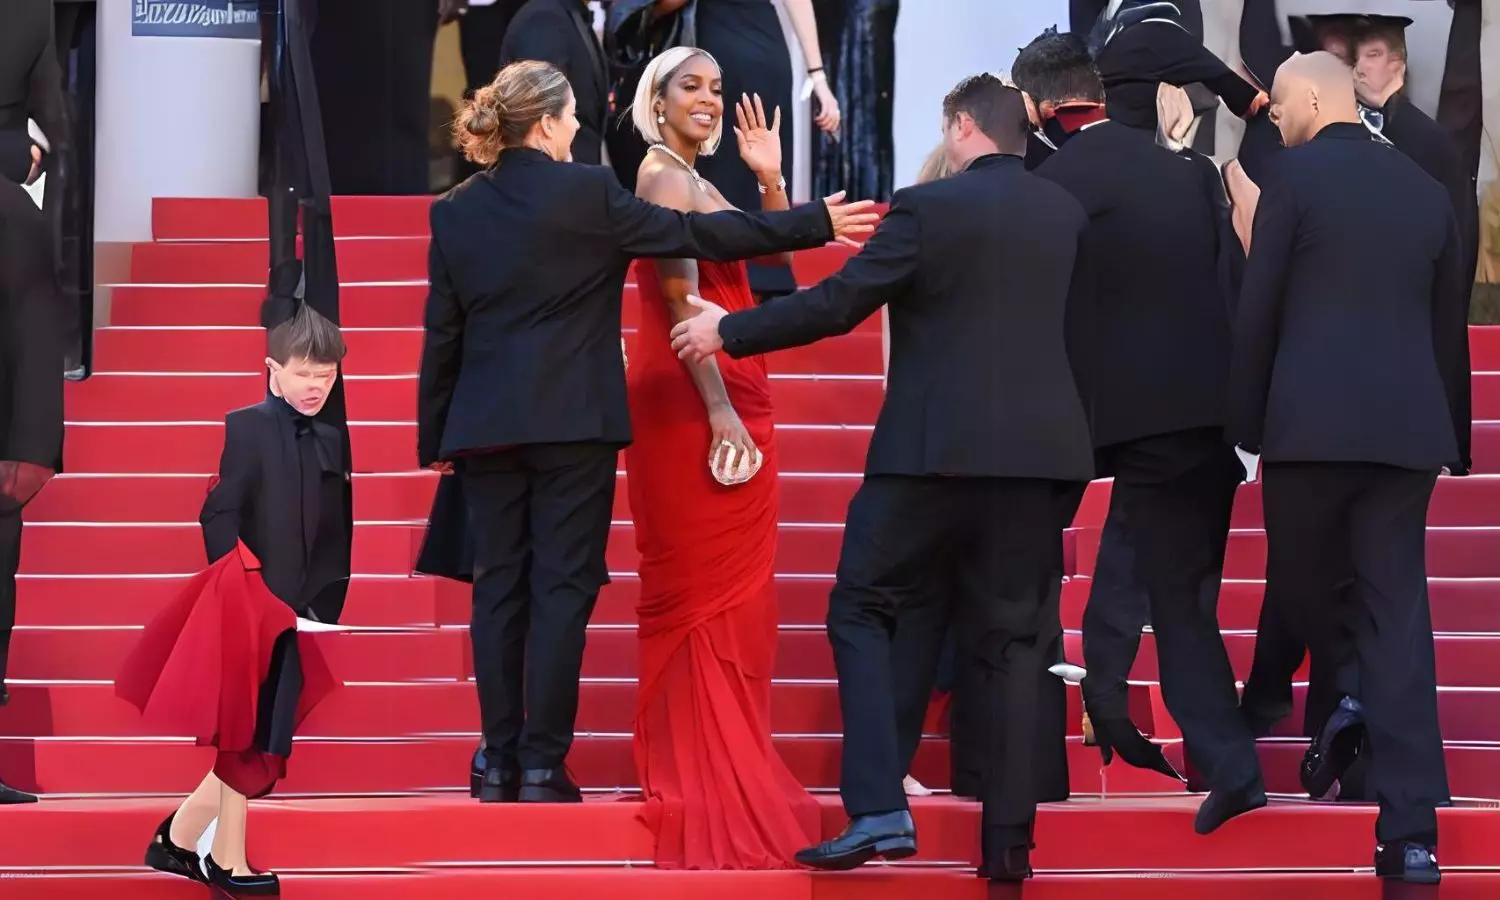 Kelly Rowland Appears to Argue with Security Guard on Cannes Red Carpet